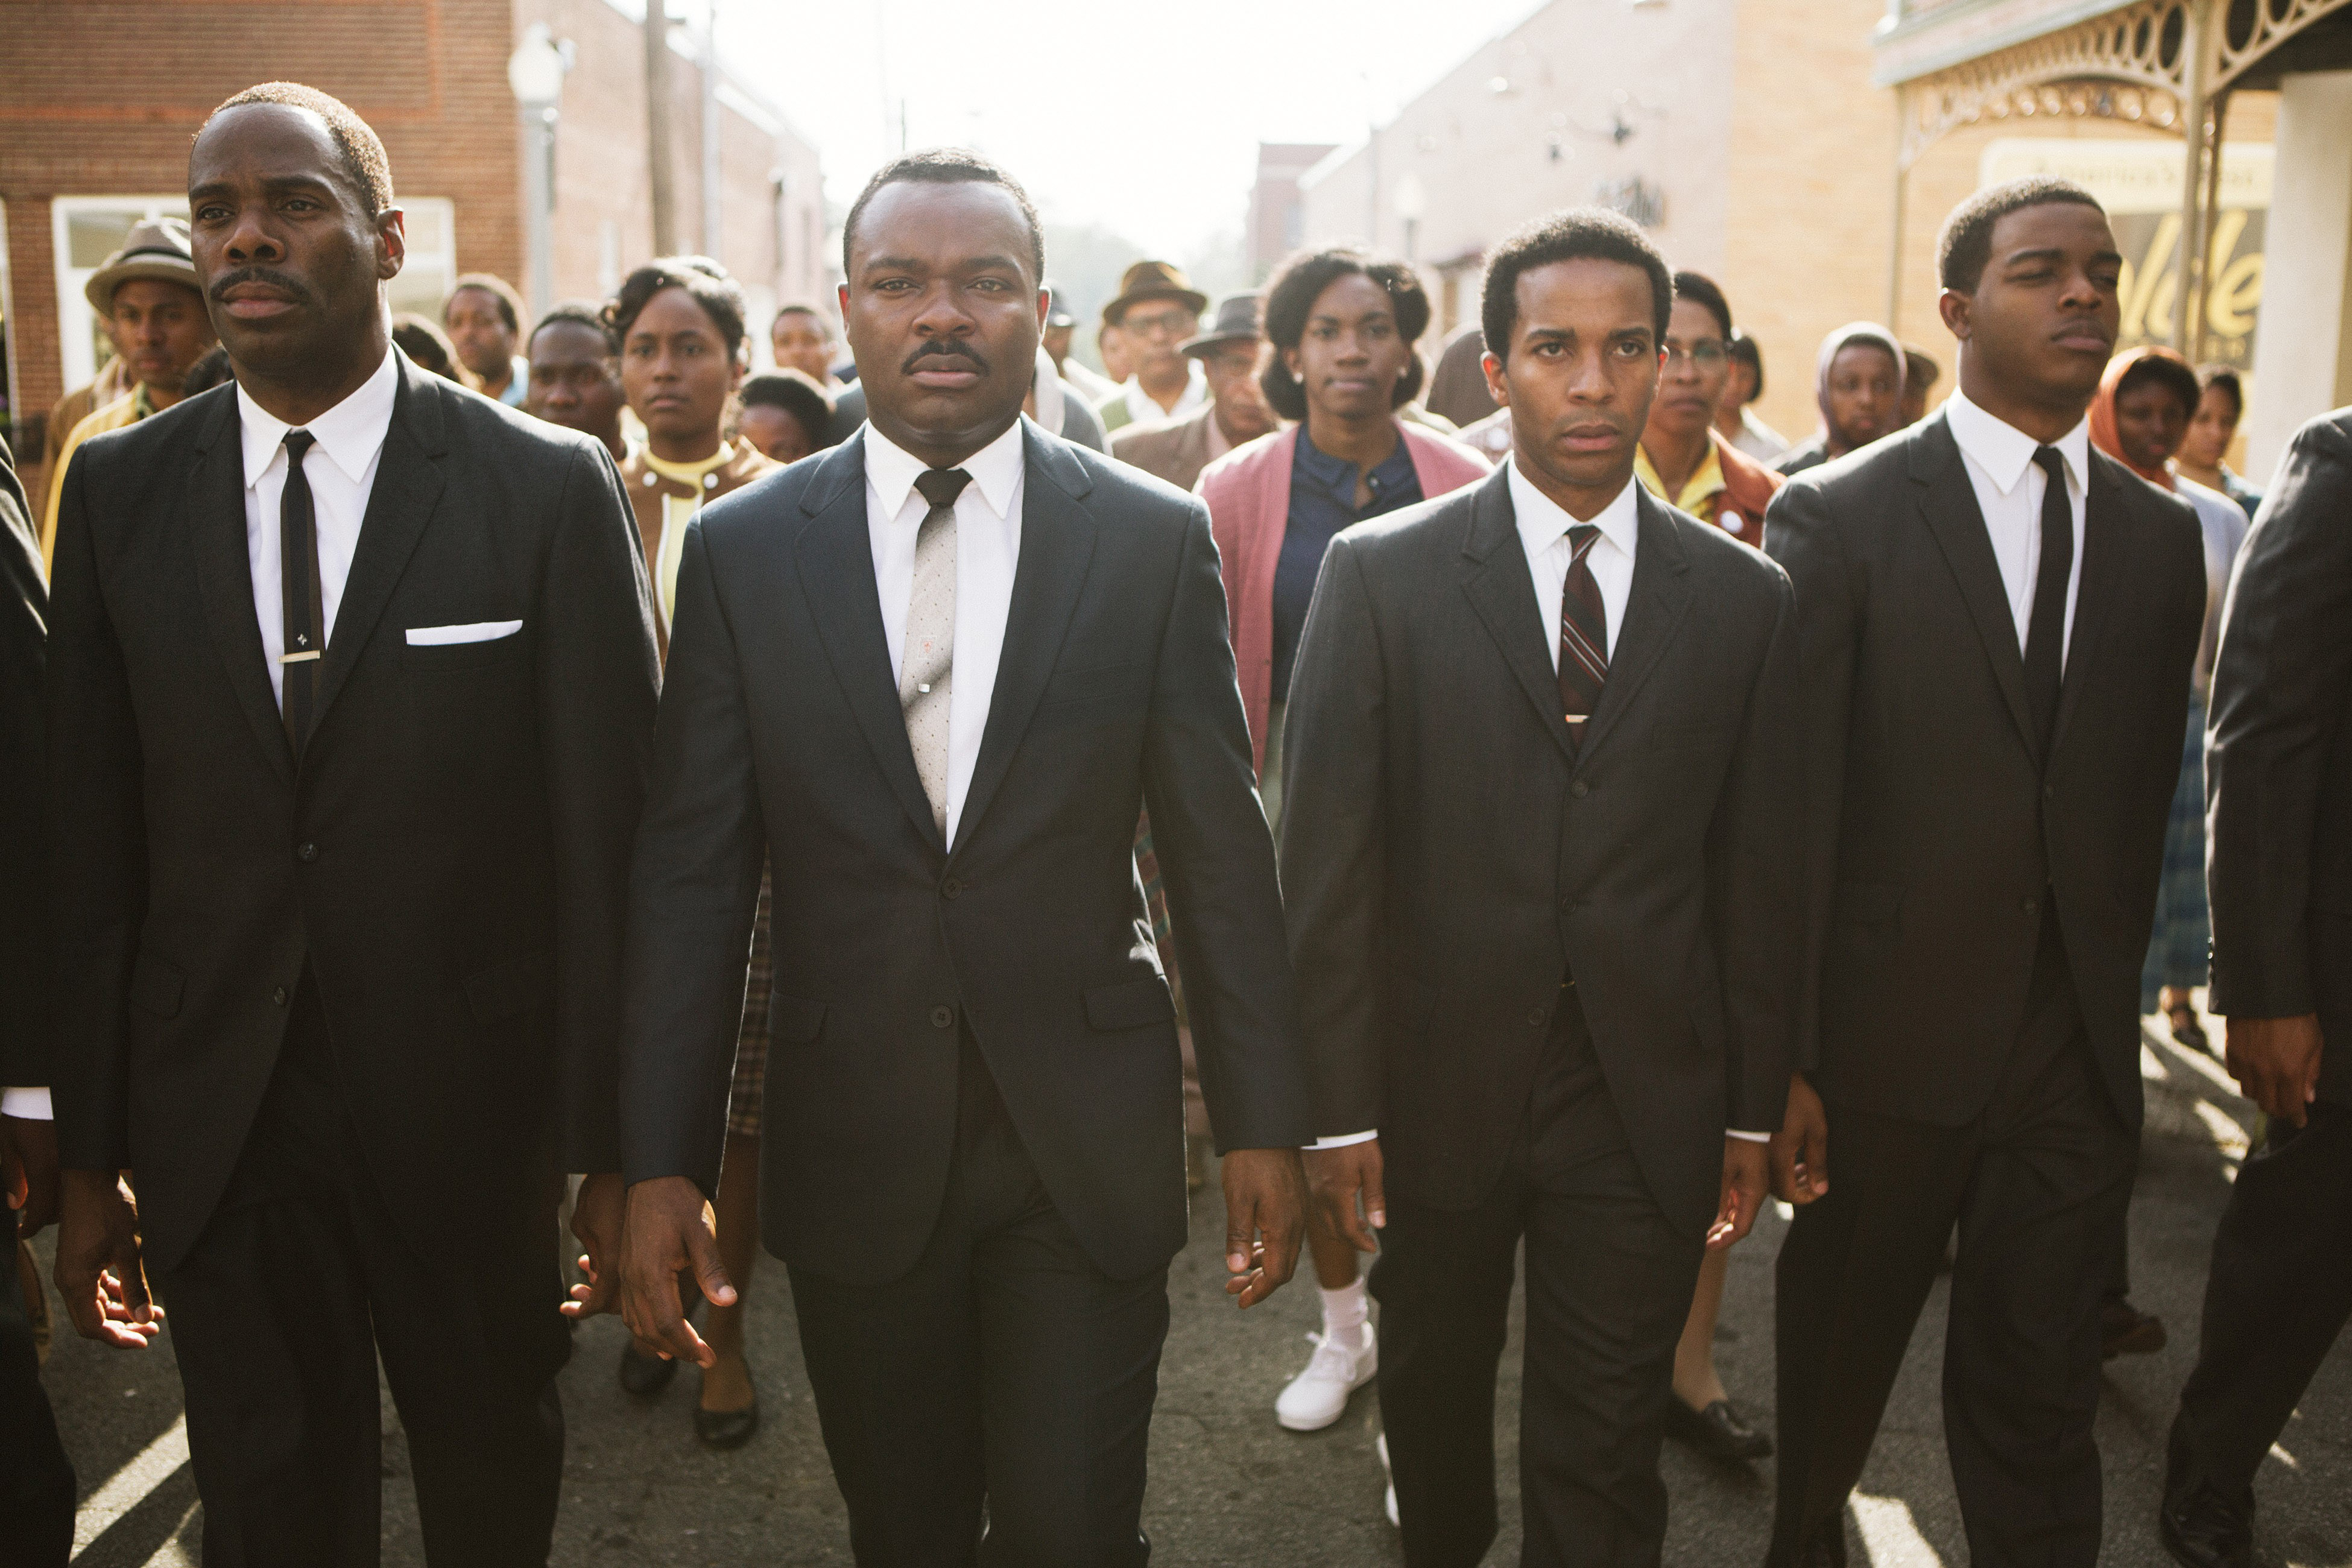 SELMA, from left: Colman Domingo, David Oyelowo, as Martin Luther King Jr., Andre Holland, Stephan James, 2014.